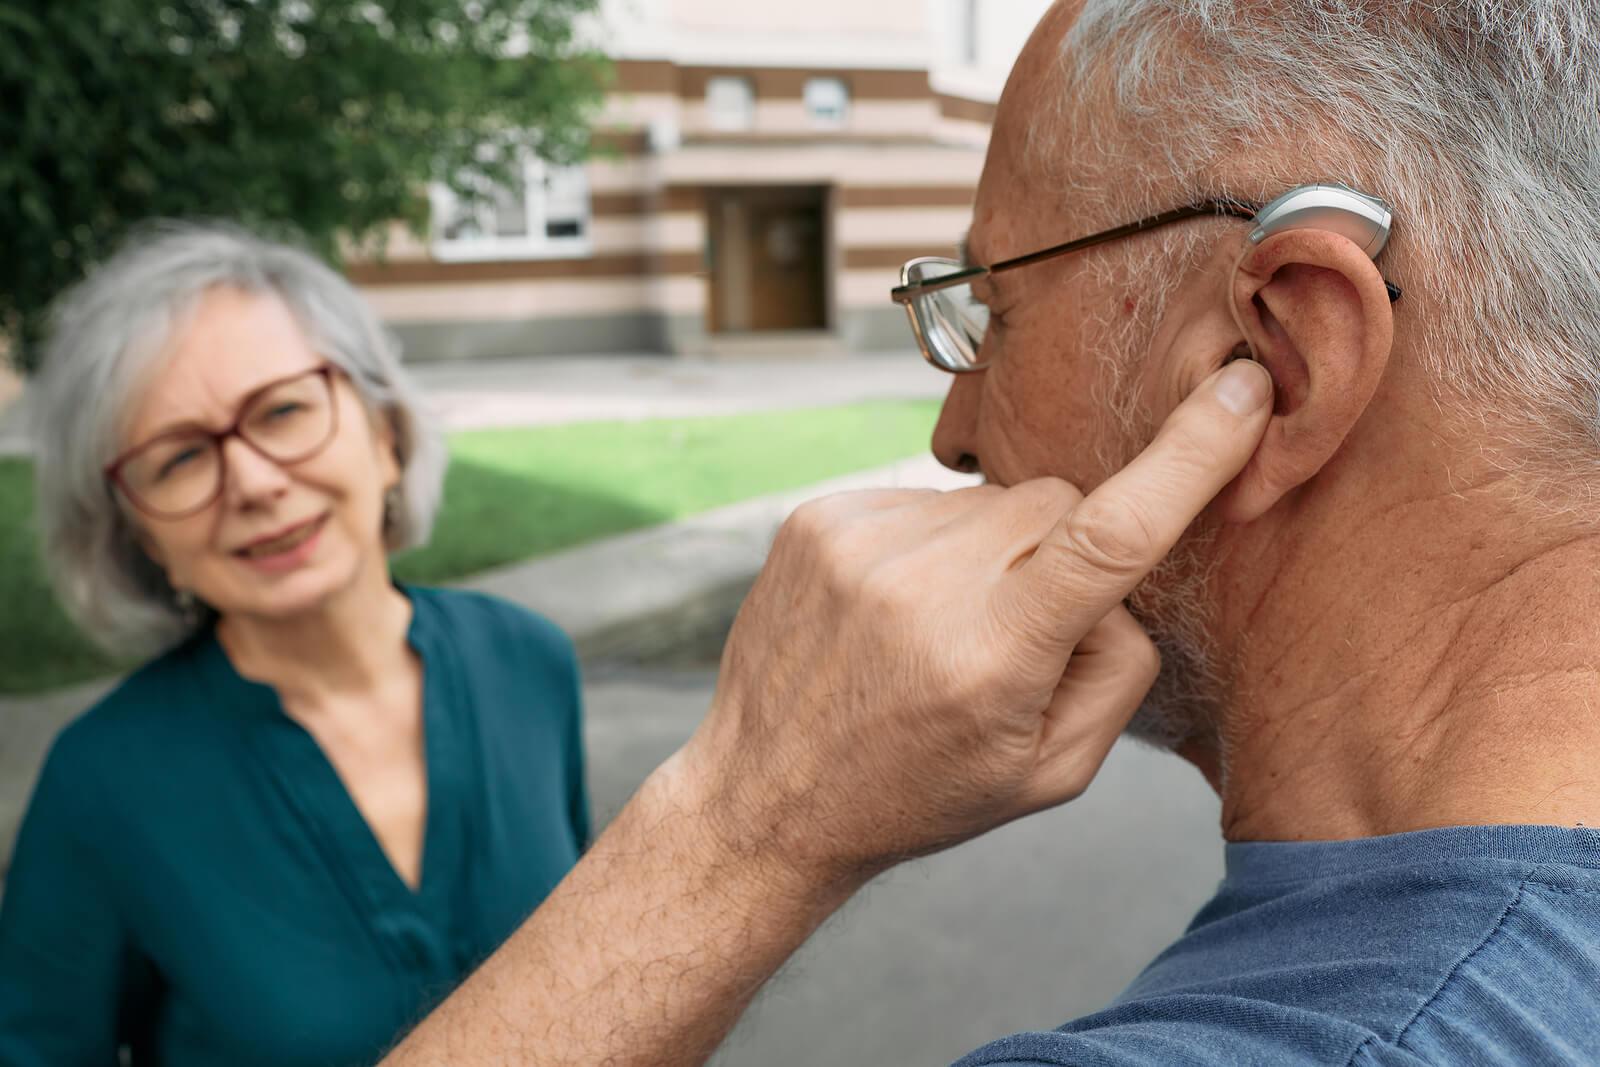 Finding the Perfect Fit: Things to Consider When Selecting Hearing Aids